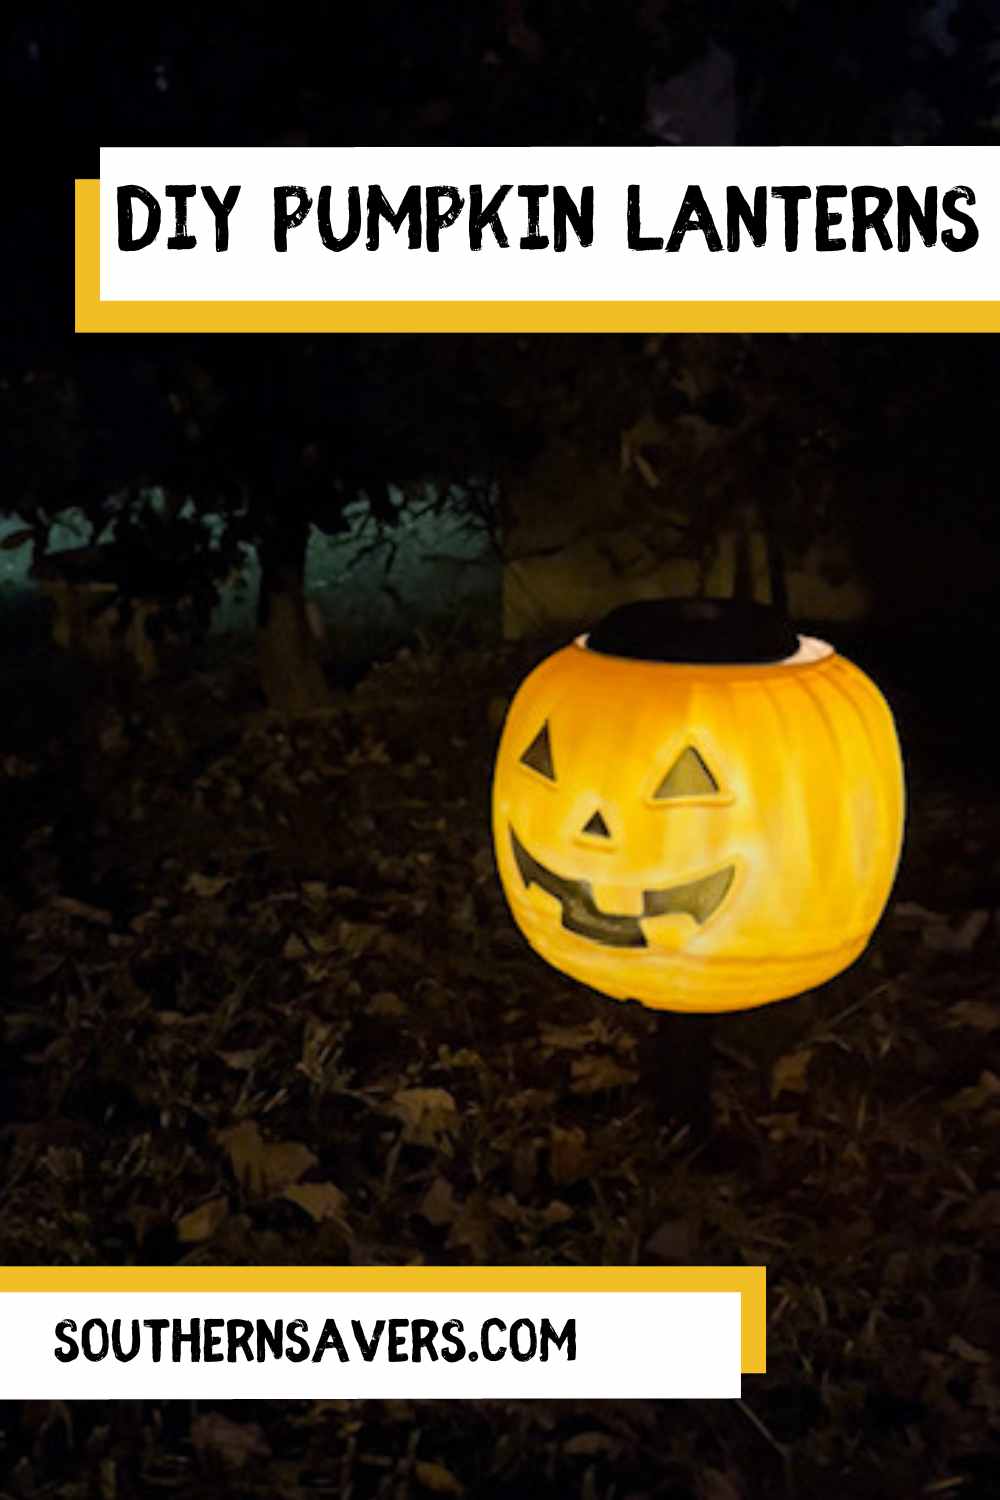 Get your yard looking festive this year with some super easy DIY pumpkin lanterns! You'll just need to grab pumpkin pails and solar lights.